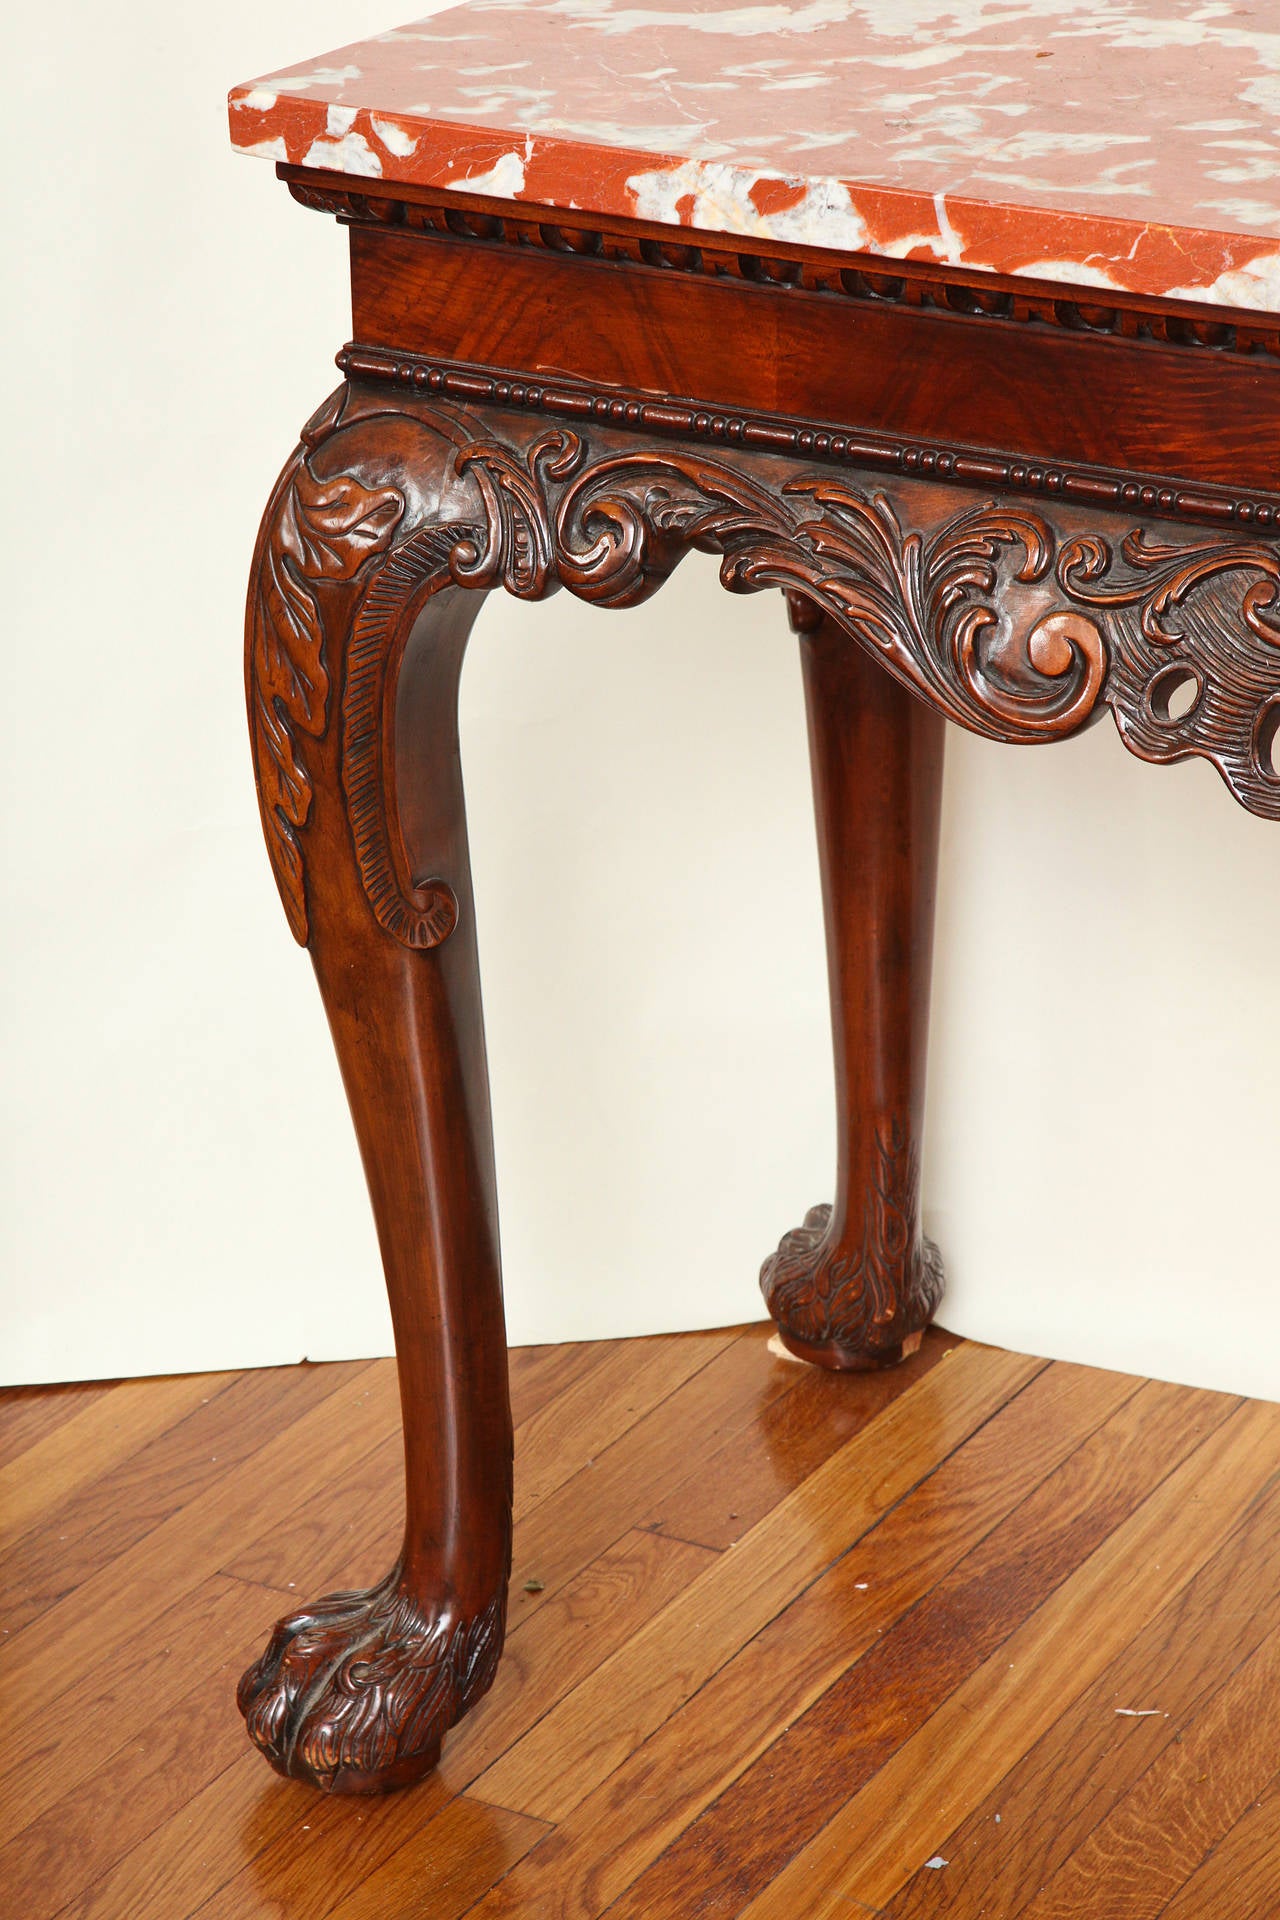 A Pair of English George II style hand carved mahogany side tables with shaped apron having open fret detailed acanthus leaves and scrolls. The crotch mahogany veneered apron with beadwork molded edge and egg and dart motif below marble top. The